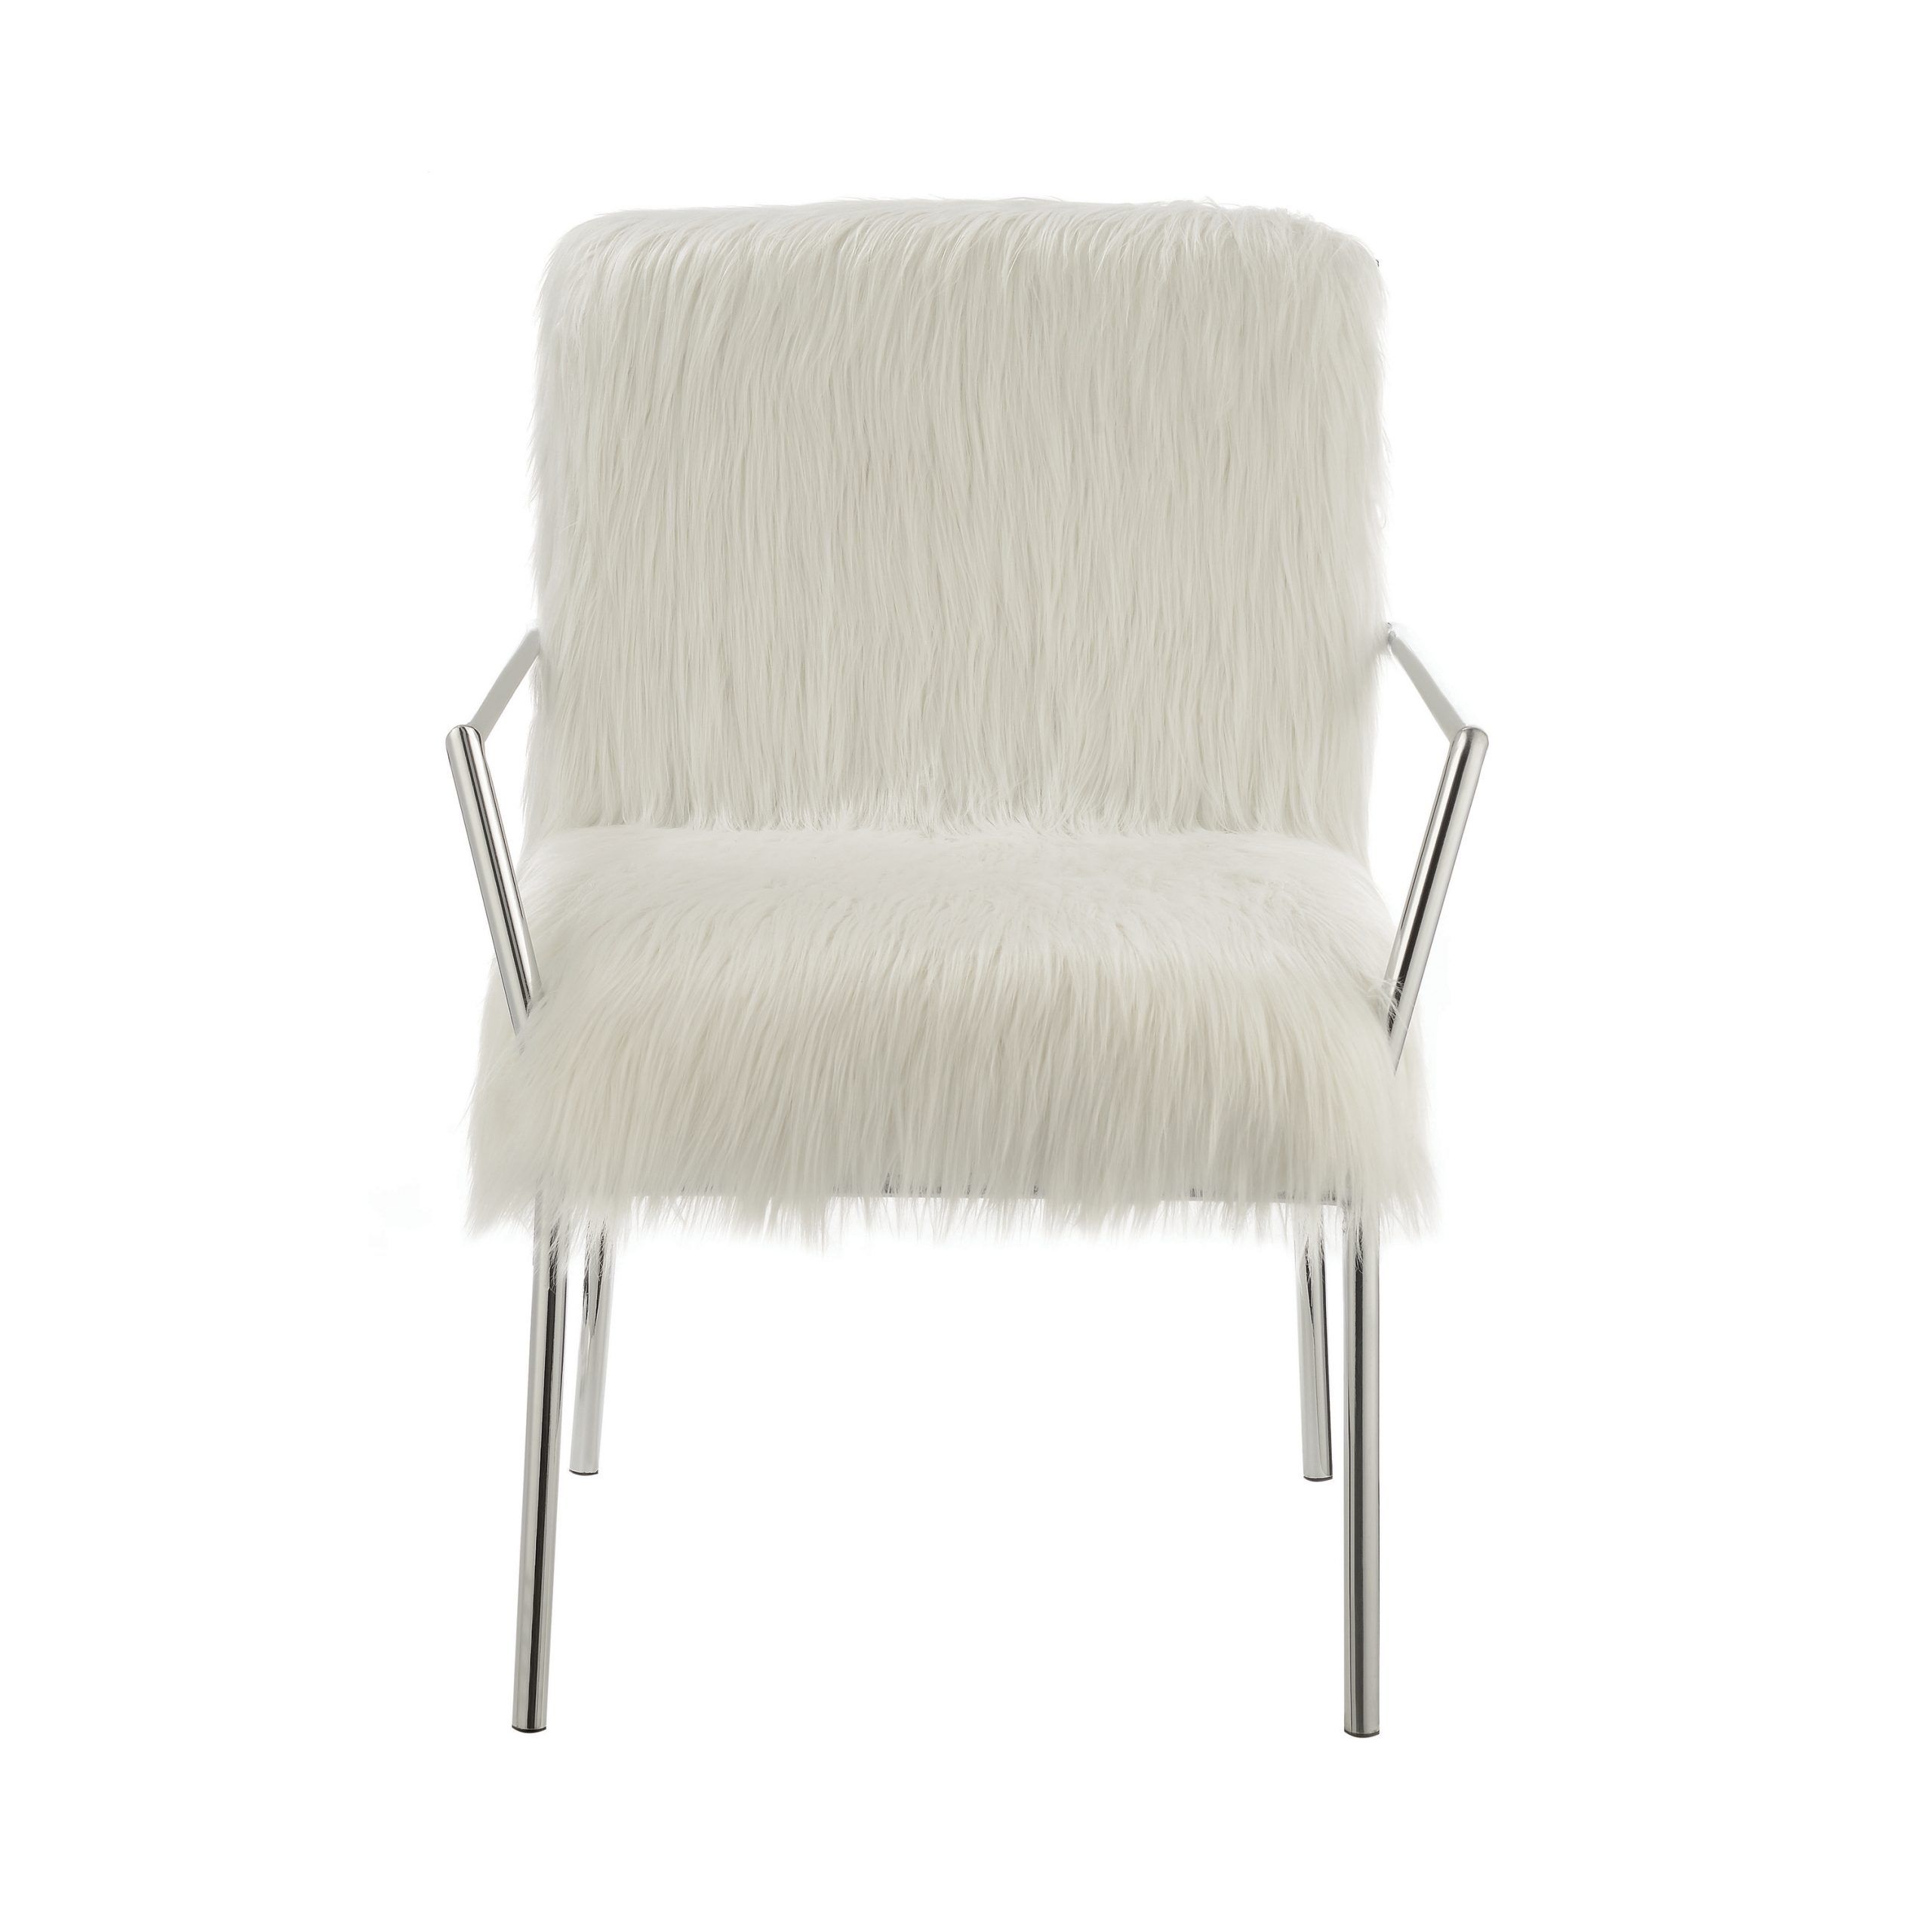 Faux Sheepskin Upholstered Accent Chair With Metal Arm White With Widely Used White Faux Fur Round Accent Stools With Storage (View 1 of 10)